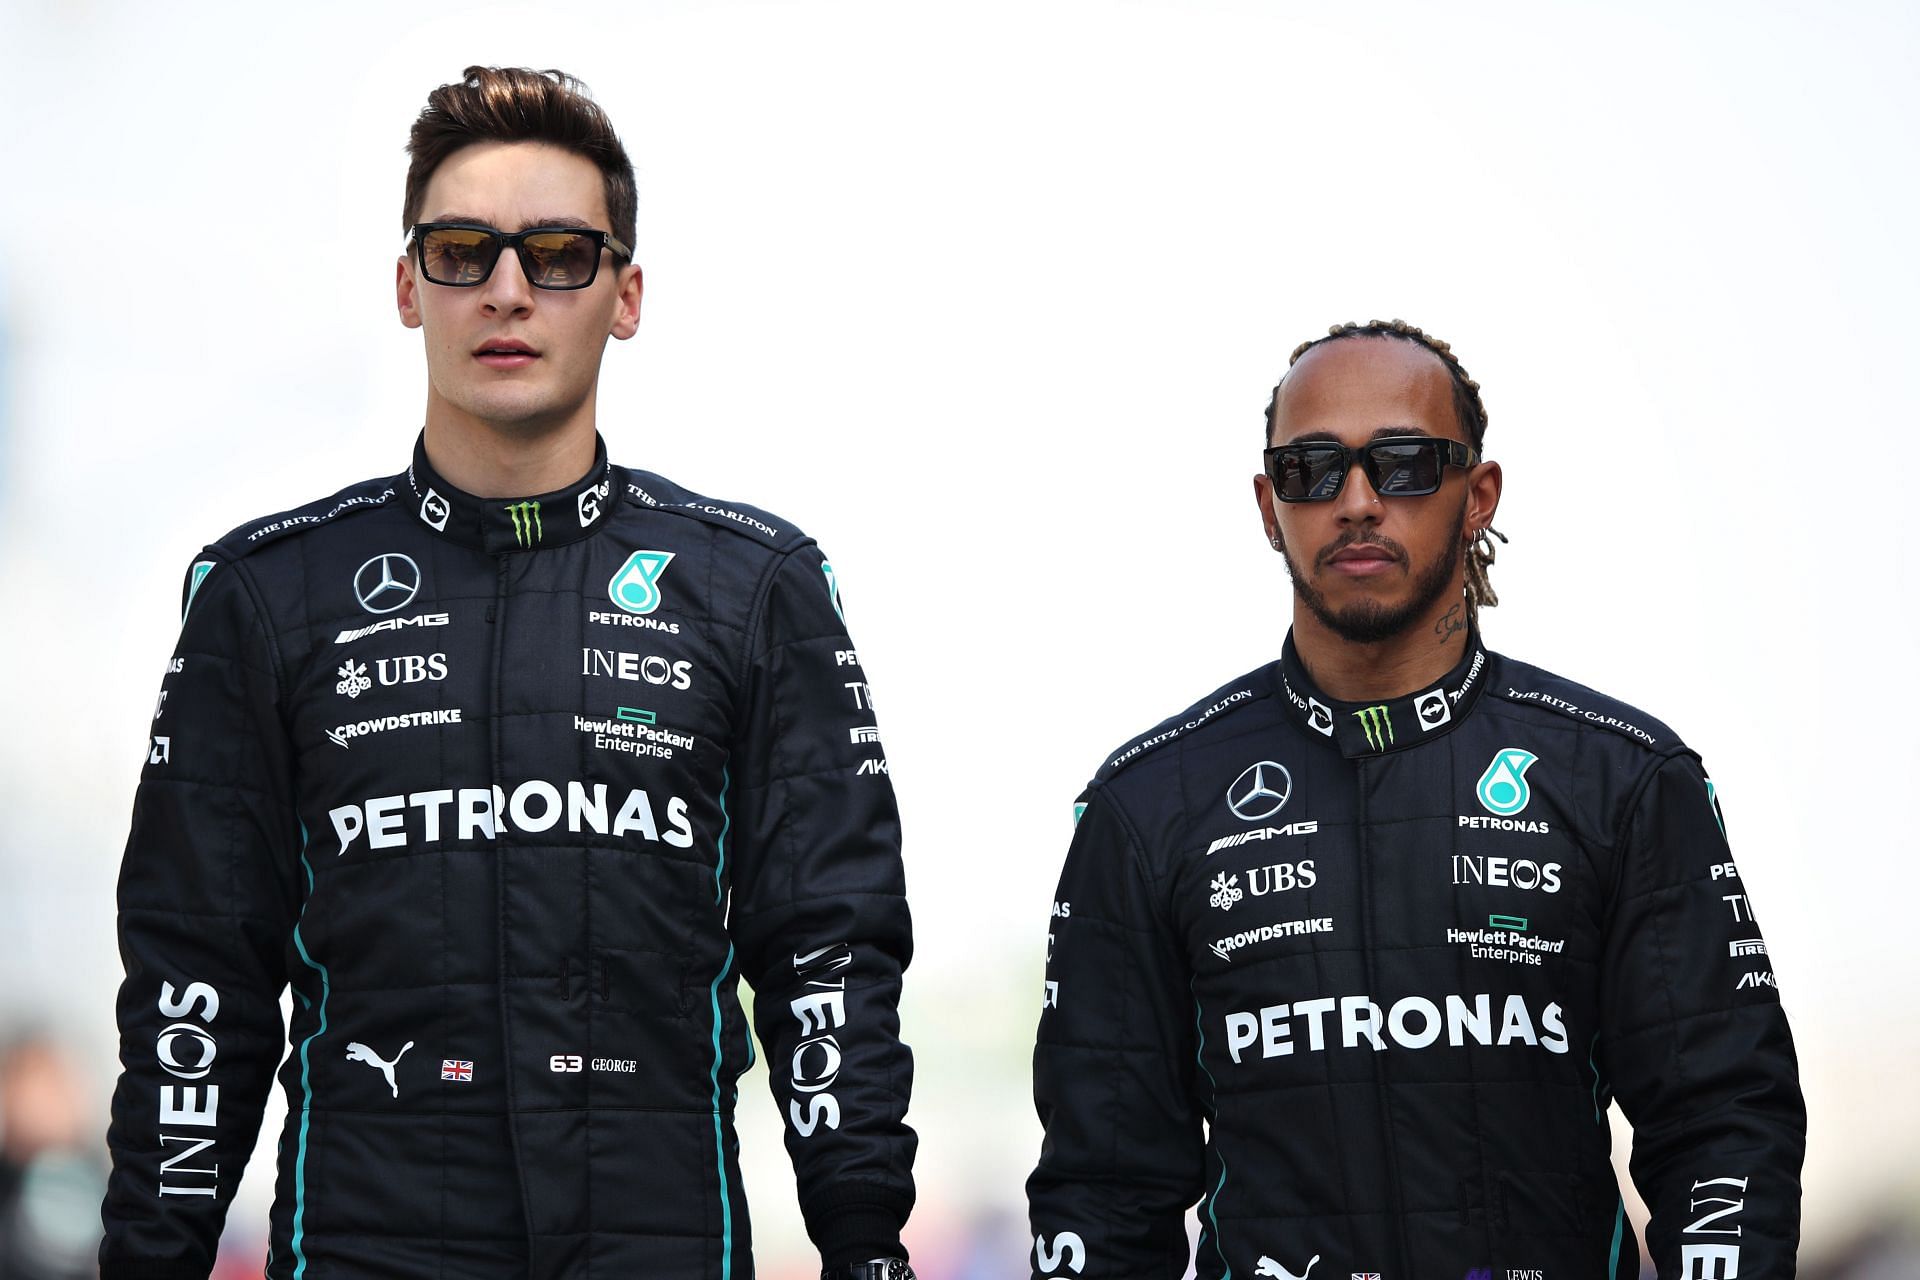 Formula 1 Testing in Bahrain - Day 1 - George Russell and Lewis Hamilton (L to R)